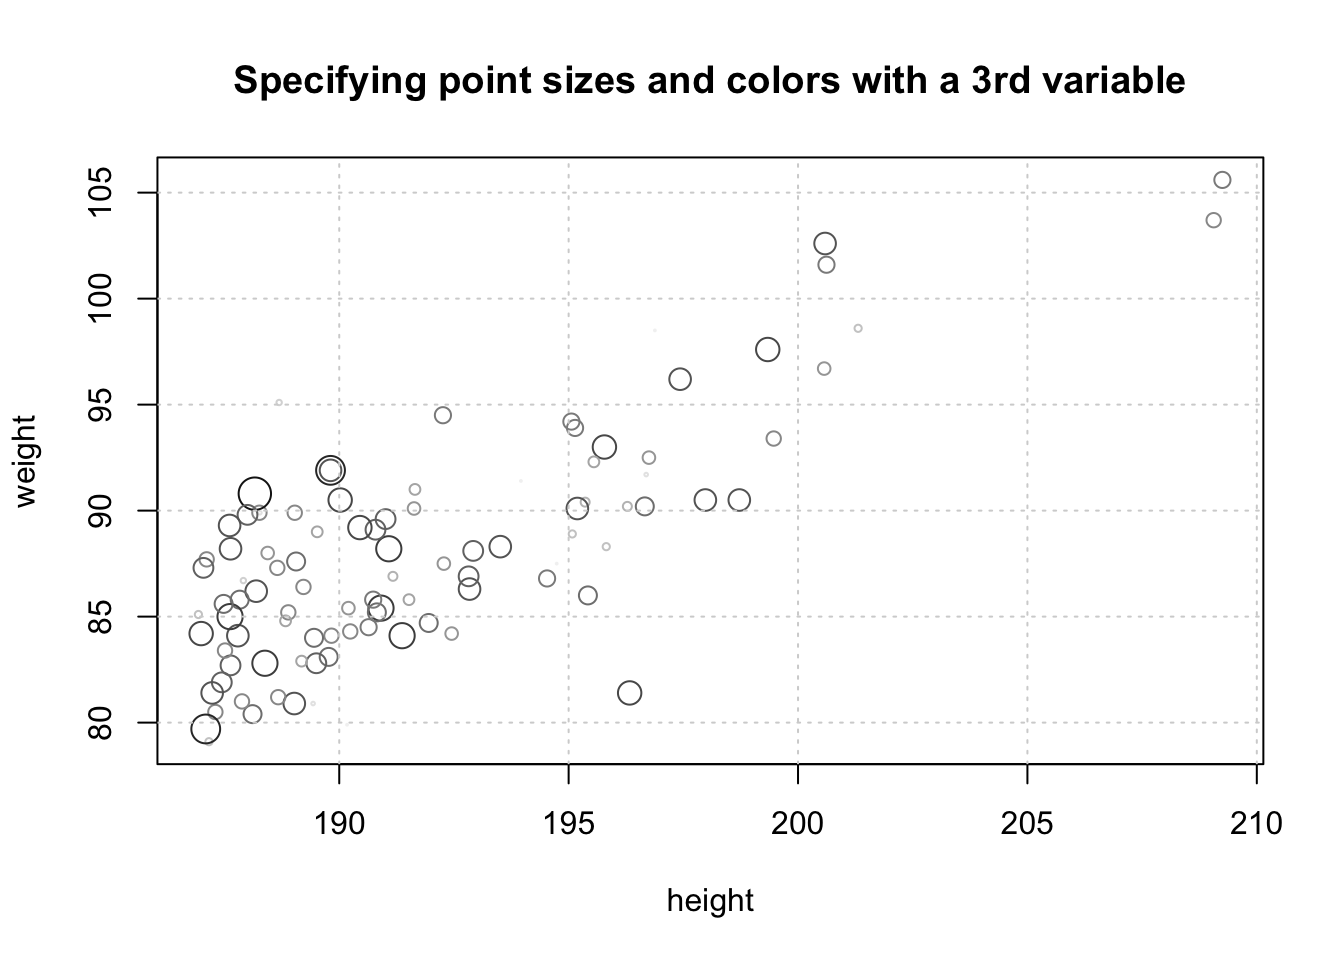 Specifying the size and color of points with a third variable.